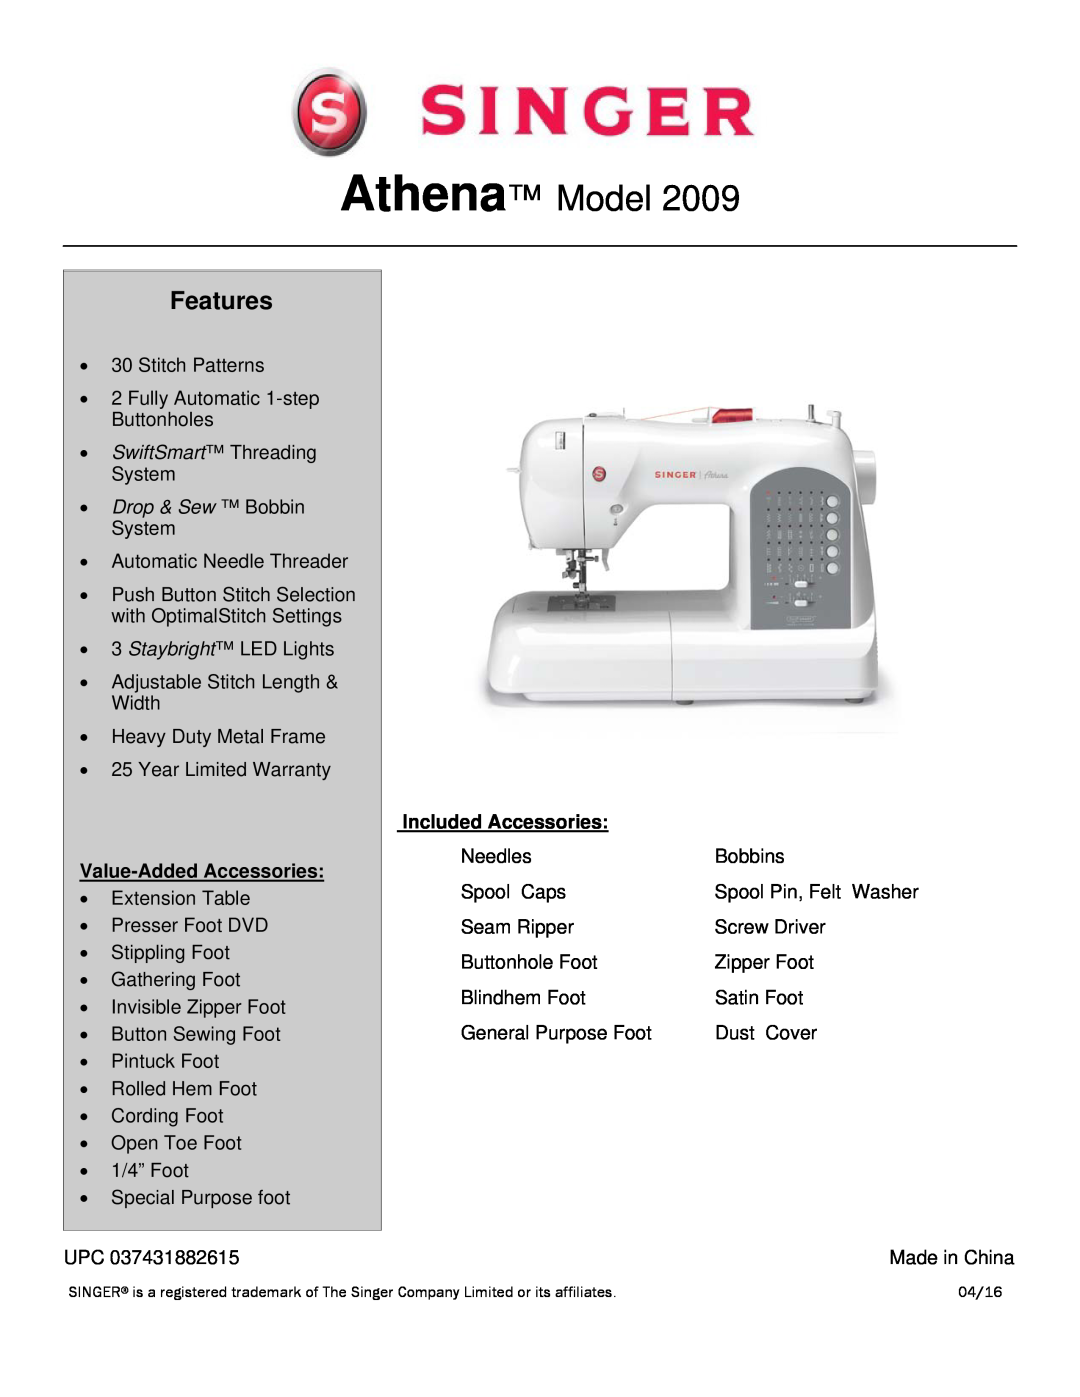 Singer 2009 warranty Athena Model, Features, Drop & Sew Bobbin System, Value-Added Accessories, Included Accessories 